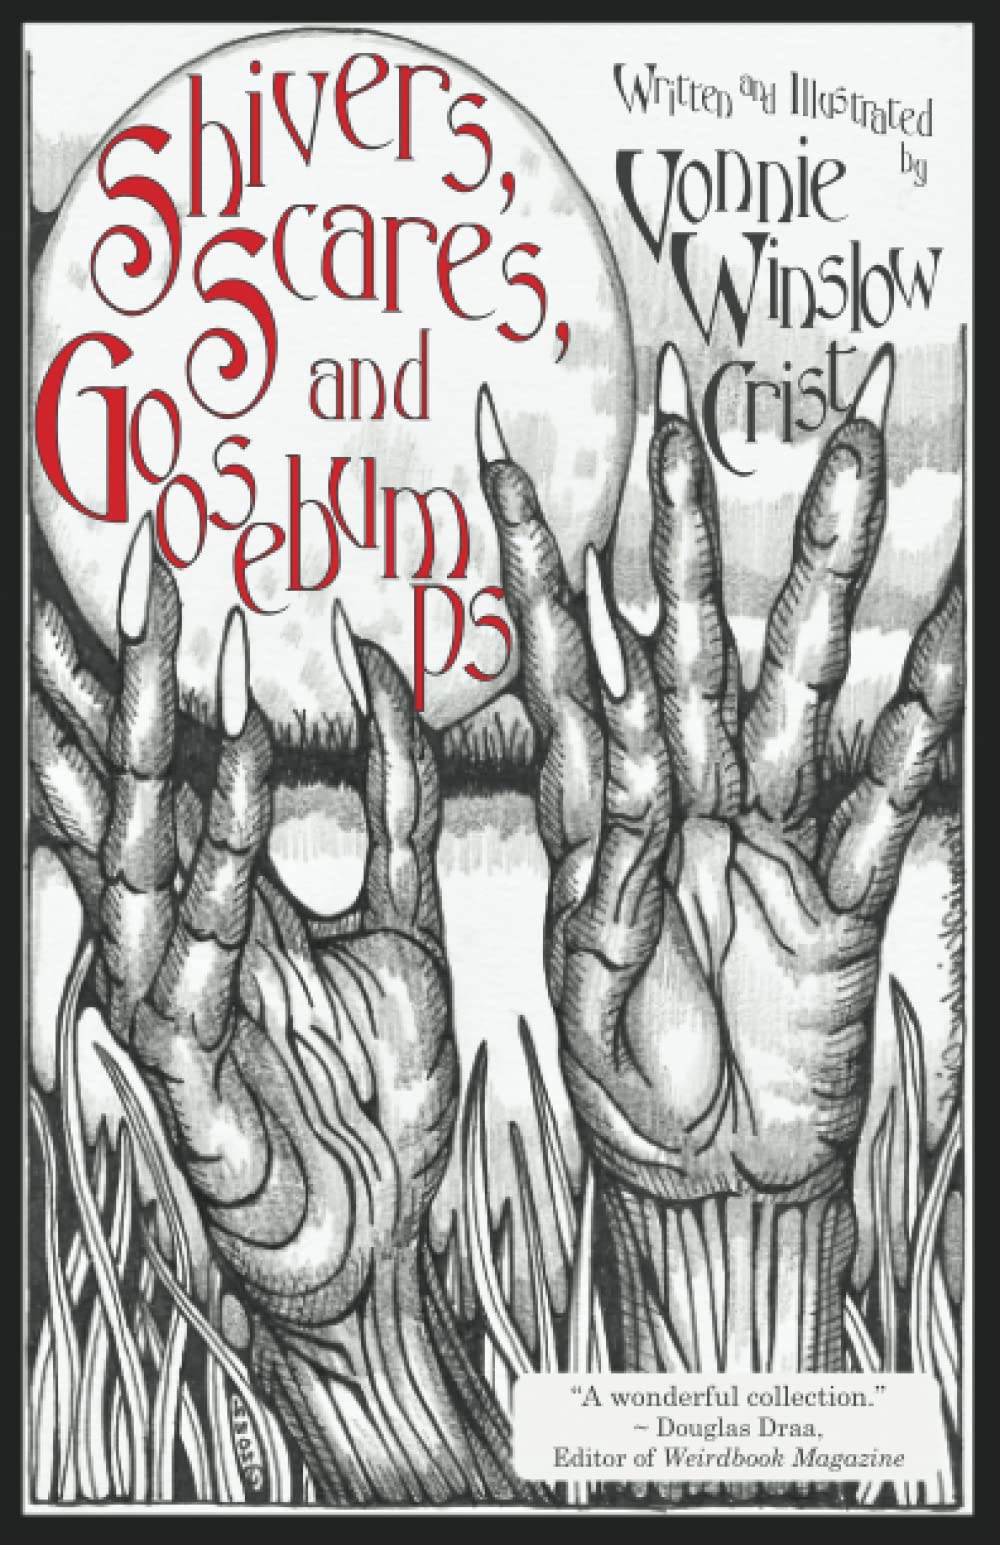 Shivers, Scares, and Goosebumps by Vonnie Winslow Crist